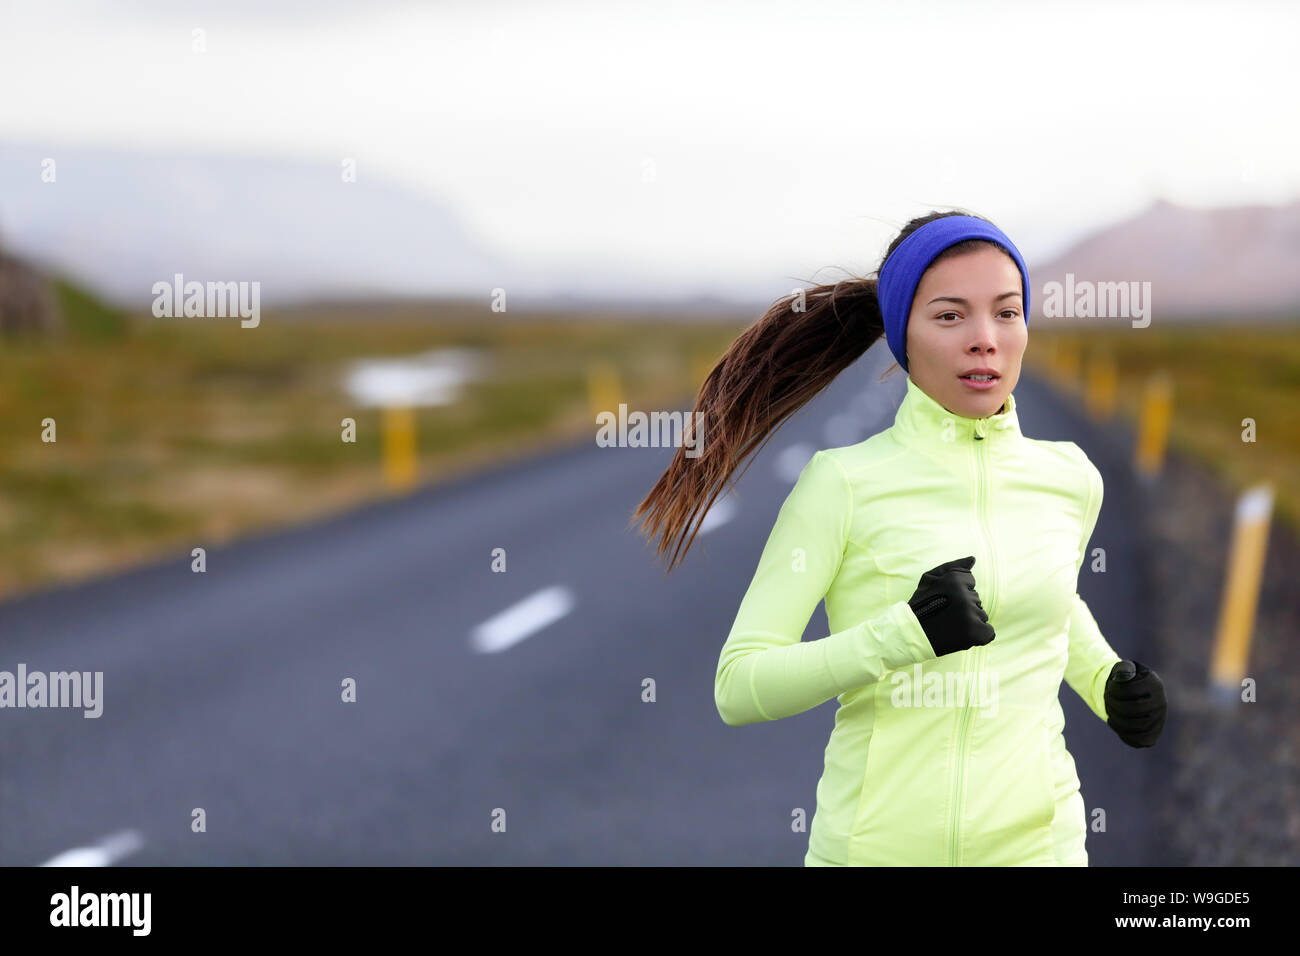 Female runner running in warm clothing for winter and autumn outside. Woman  runner training in cold weather living healthy active lifestyle Stock Photo  - Alamy